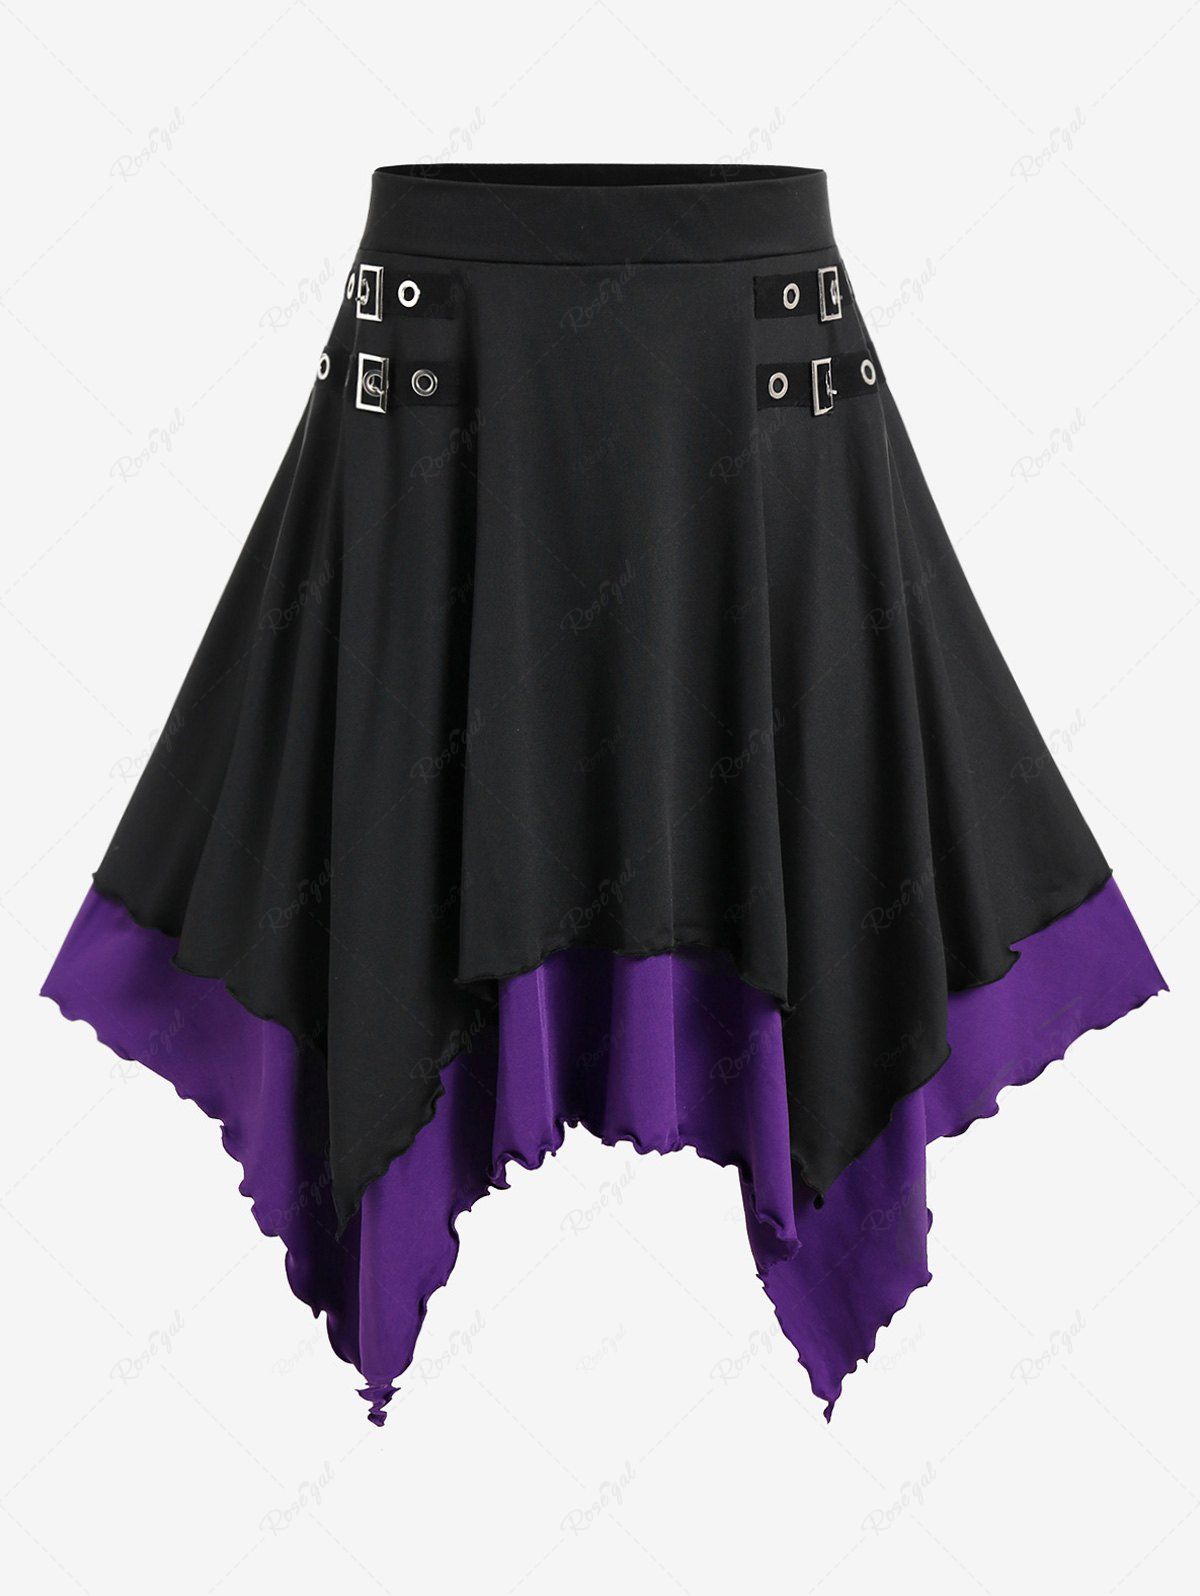 Chic Gothic Buckles Two Tone Double Layered Handkerchief Skirt  